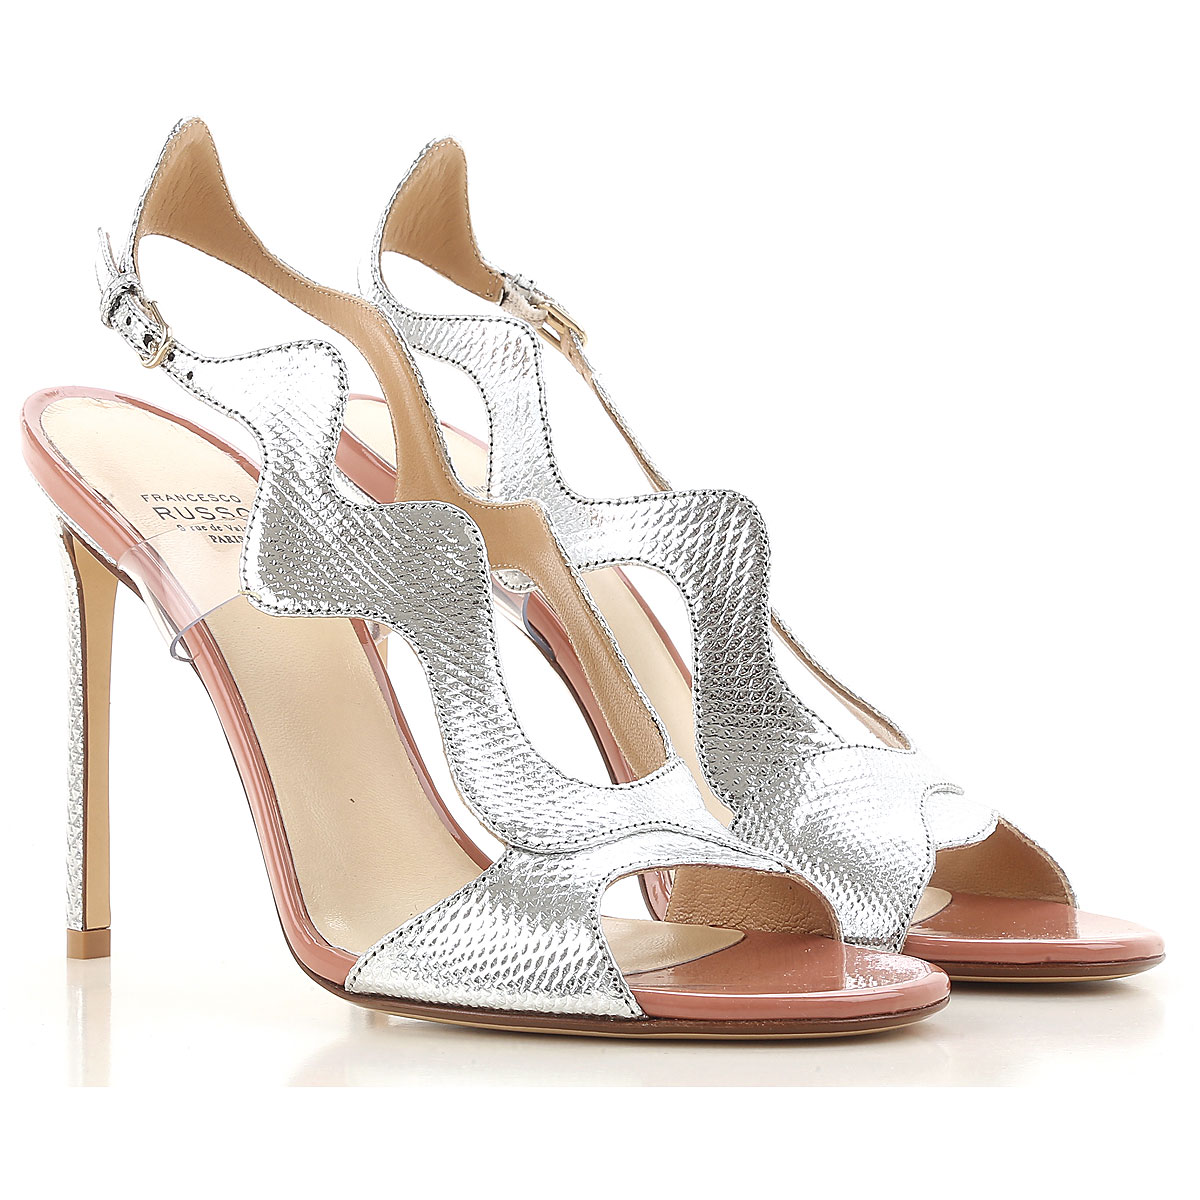 Womens Shoes Francesco Russo, Style code: r1s366-silver-